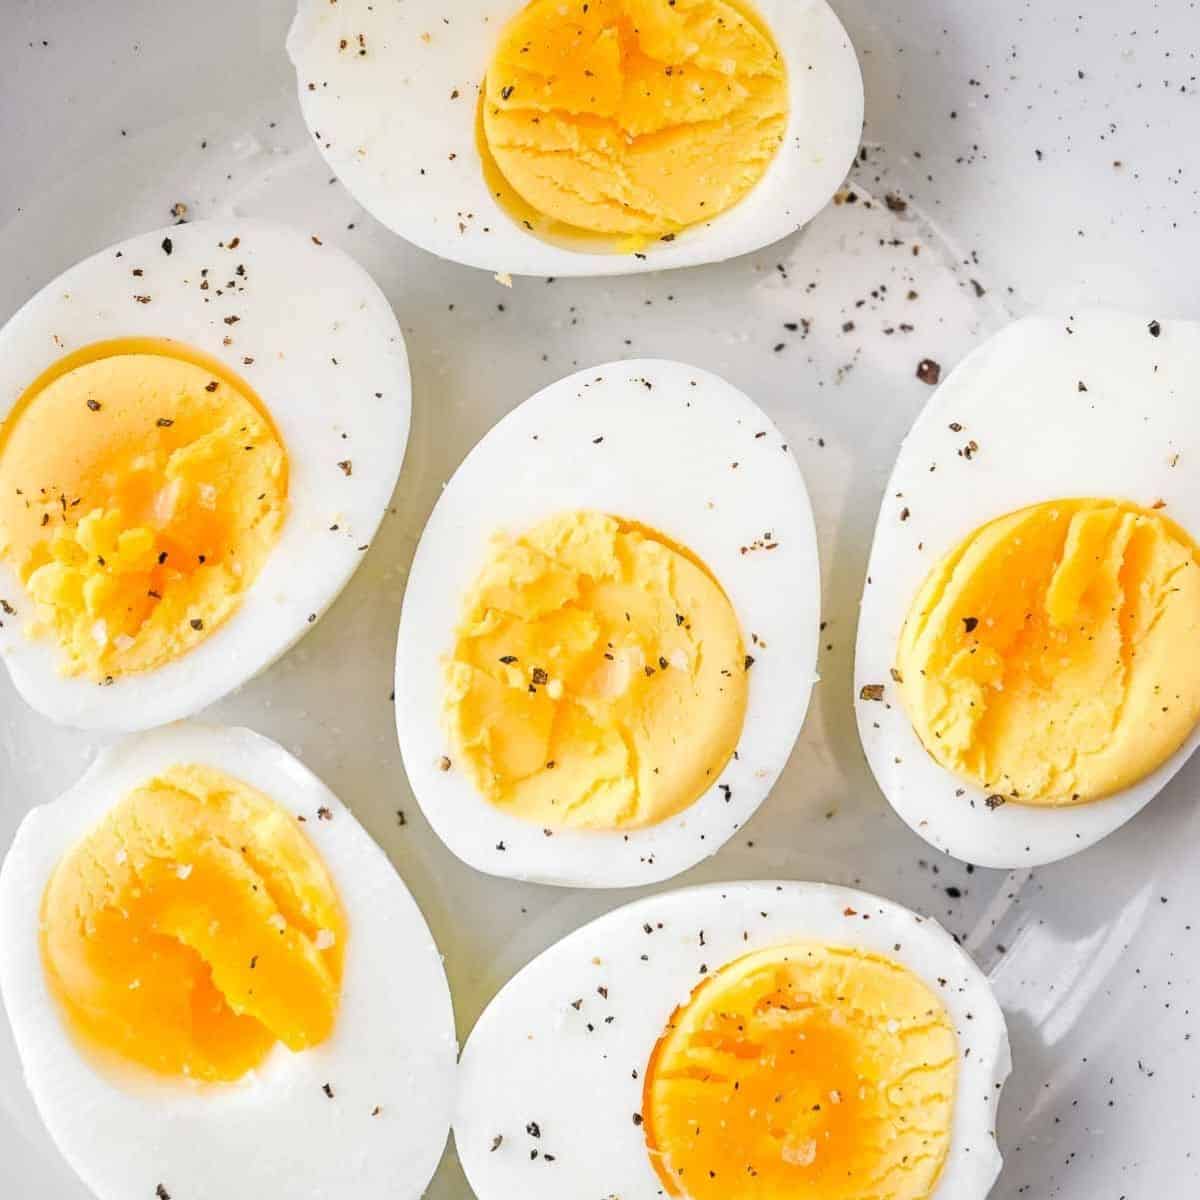 Hard Boiled Eggs - how to cook, store and use them - a Keto snack